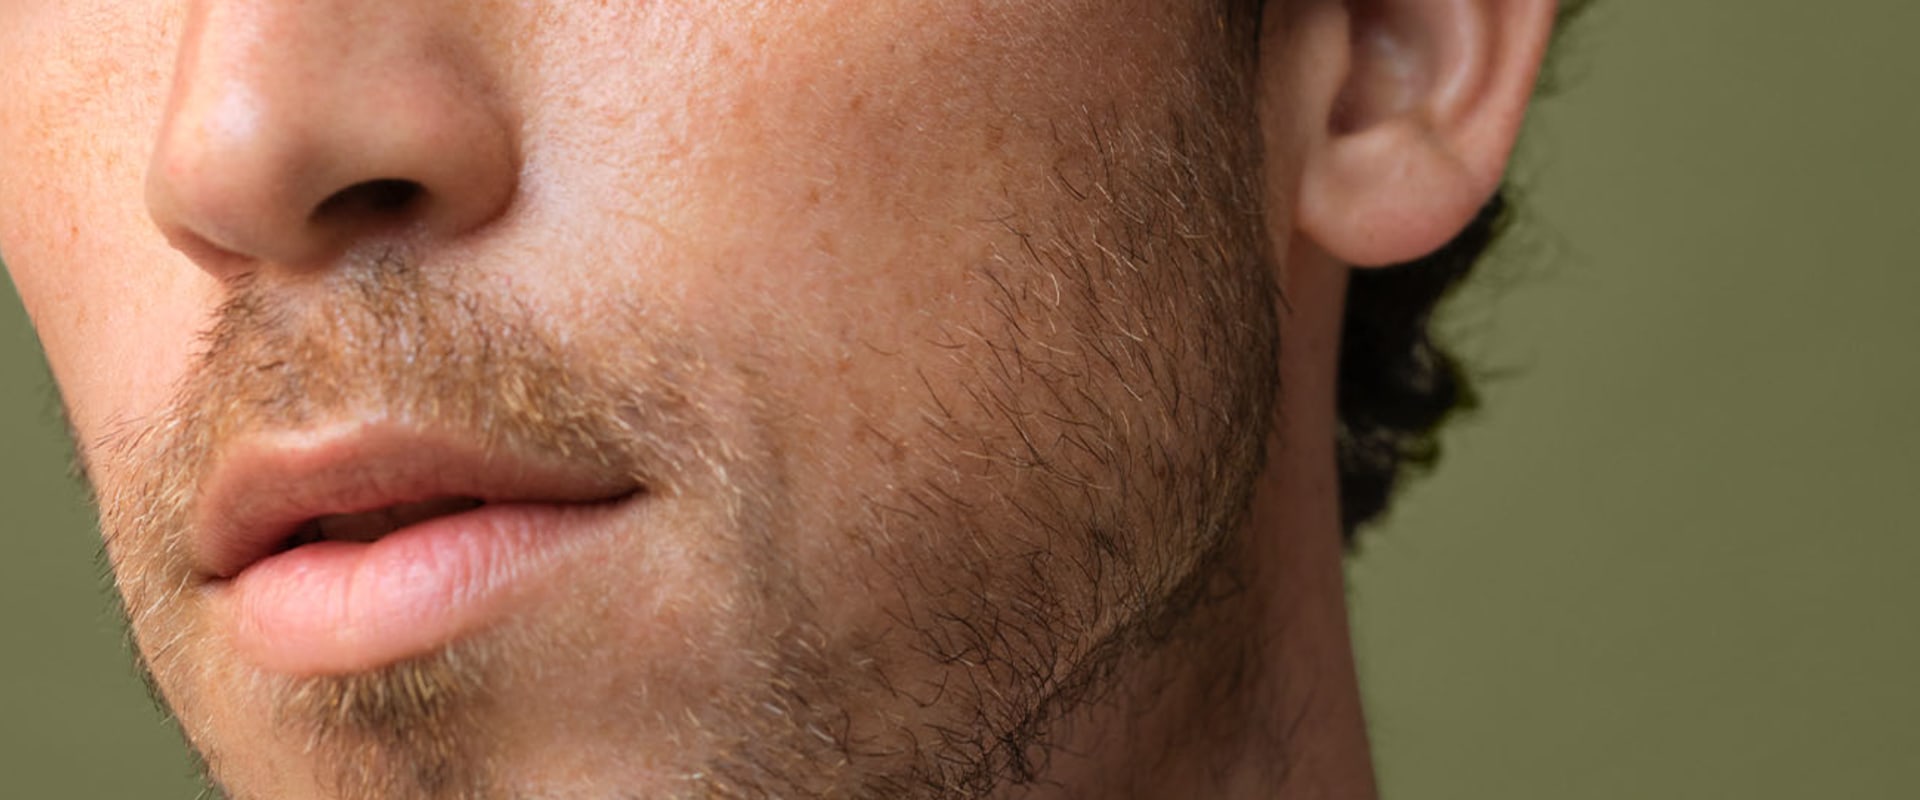 The Ultimate Guide to Incorporating Exfoliation into Your Skincare Routine for Men